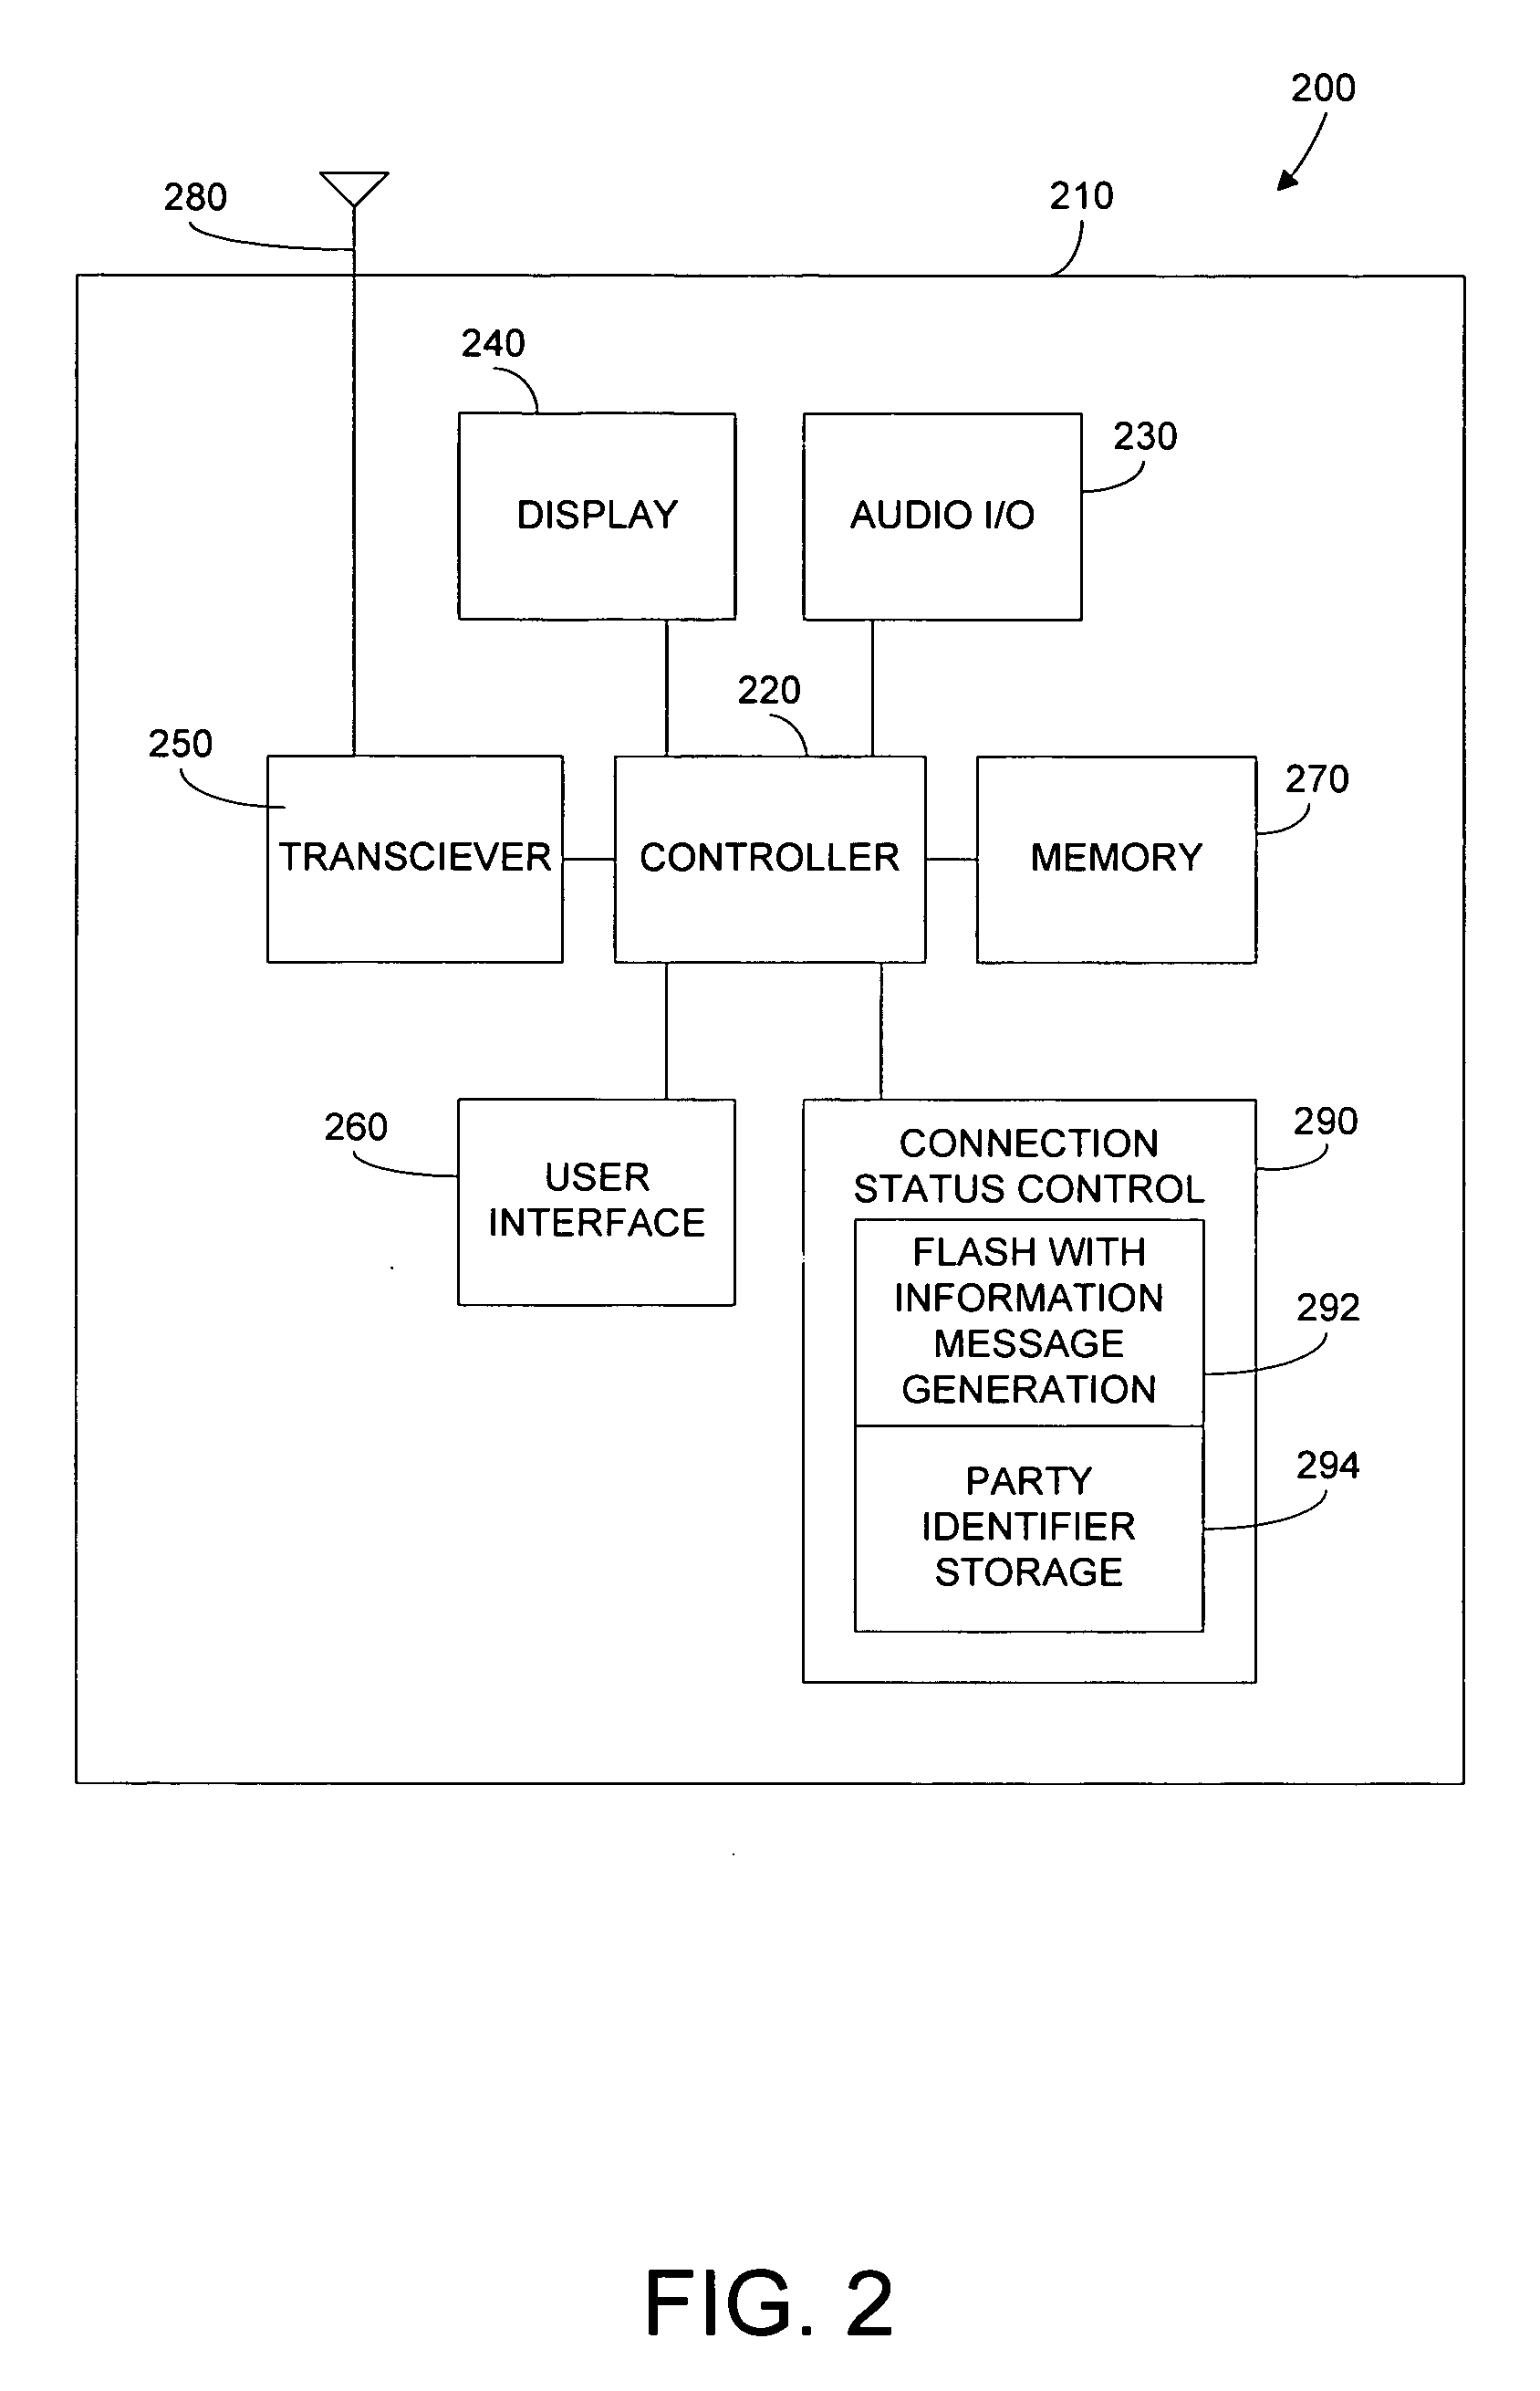 Apparatus and method for controlling connection status